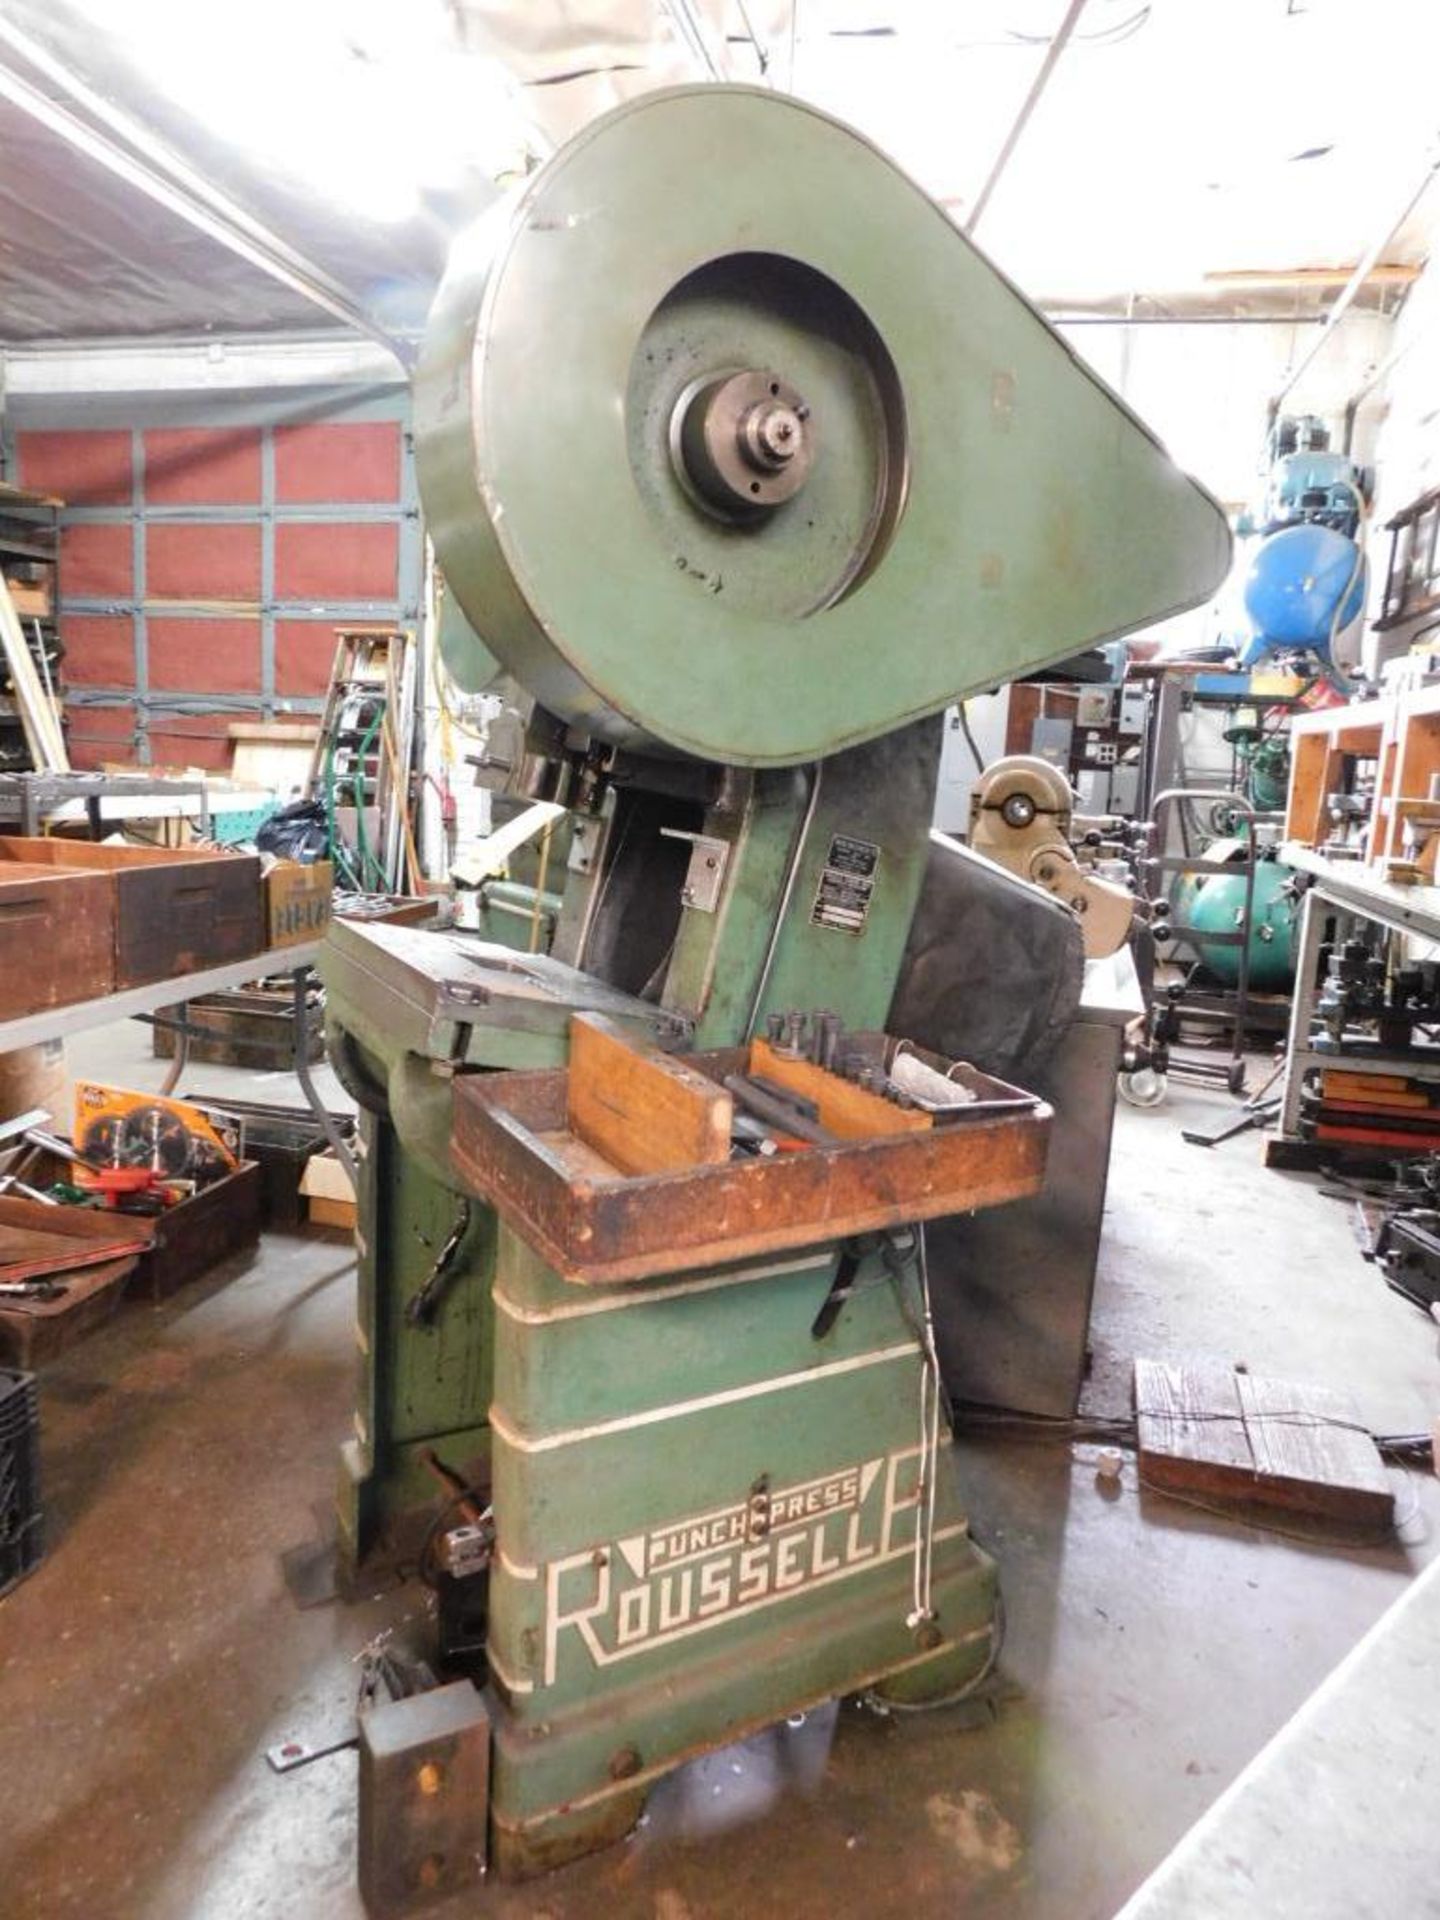 Rousselle No. 2 15-Ton OBI Air Clutch Punch Press. 2" Stroke, 6.75" Shut Height, 16"x11" Bolster Pla - Image 4 of 10